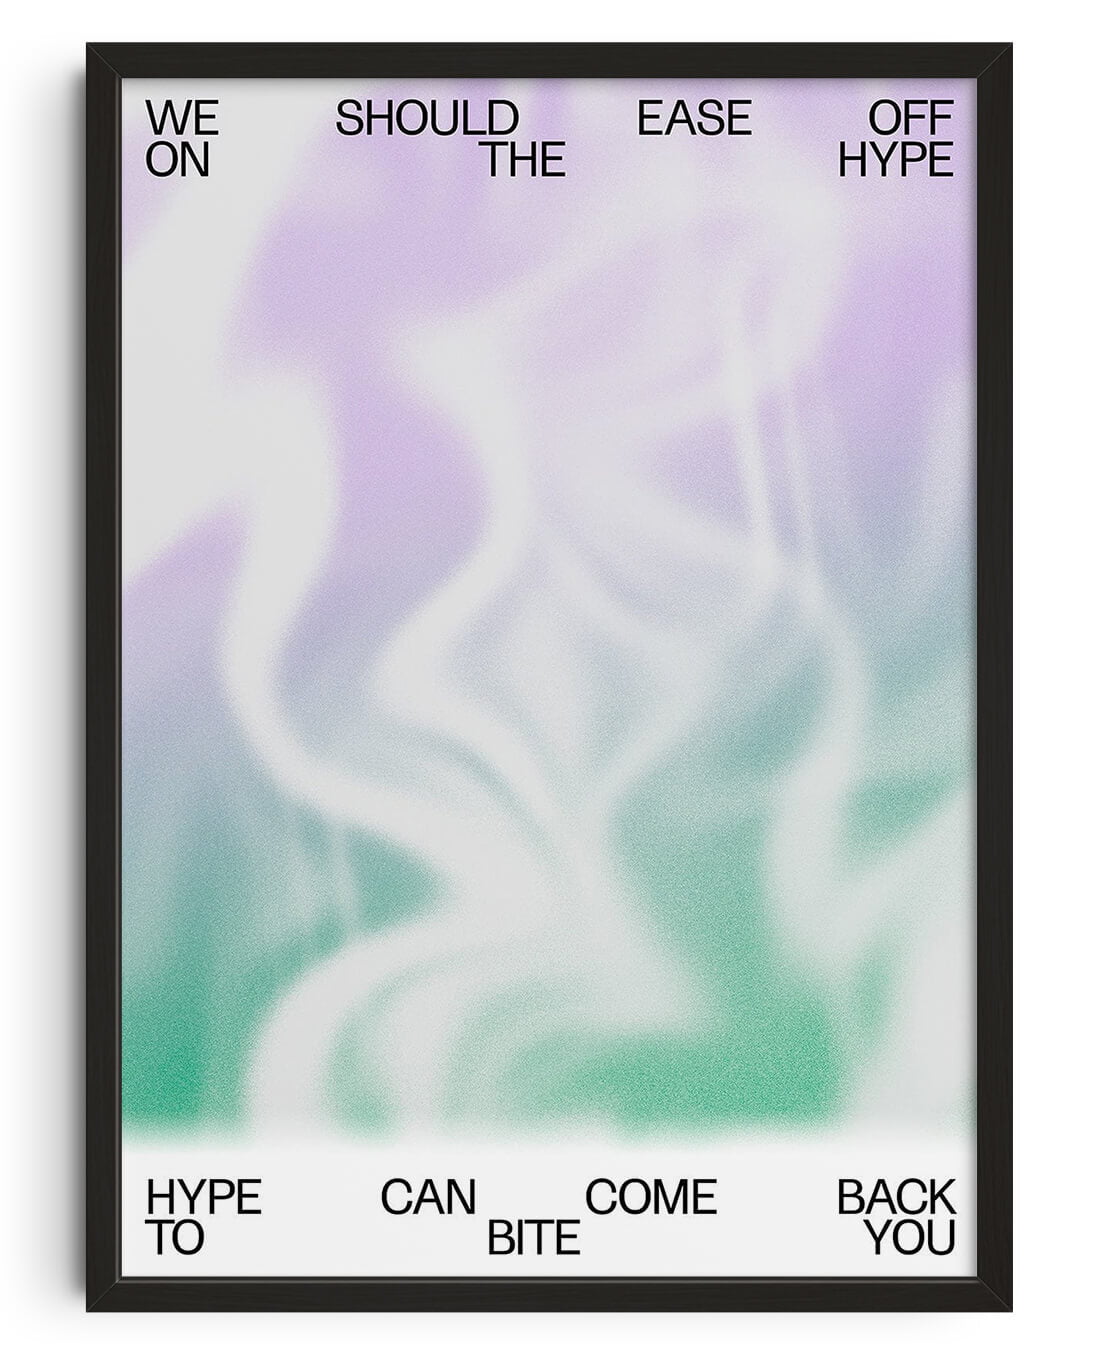 HYPE by John Schulisch contemporary wall art print from DROOL